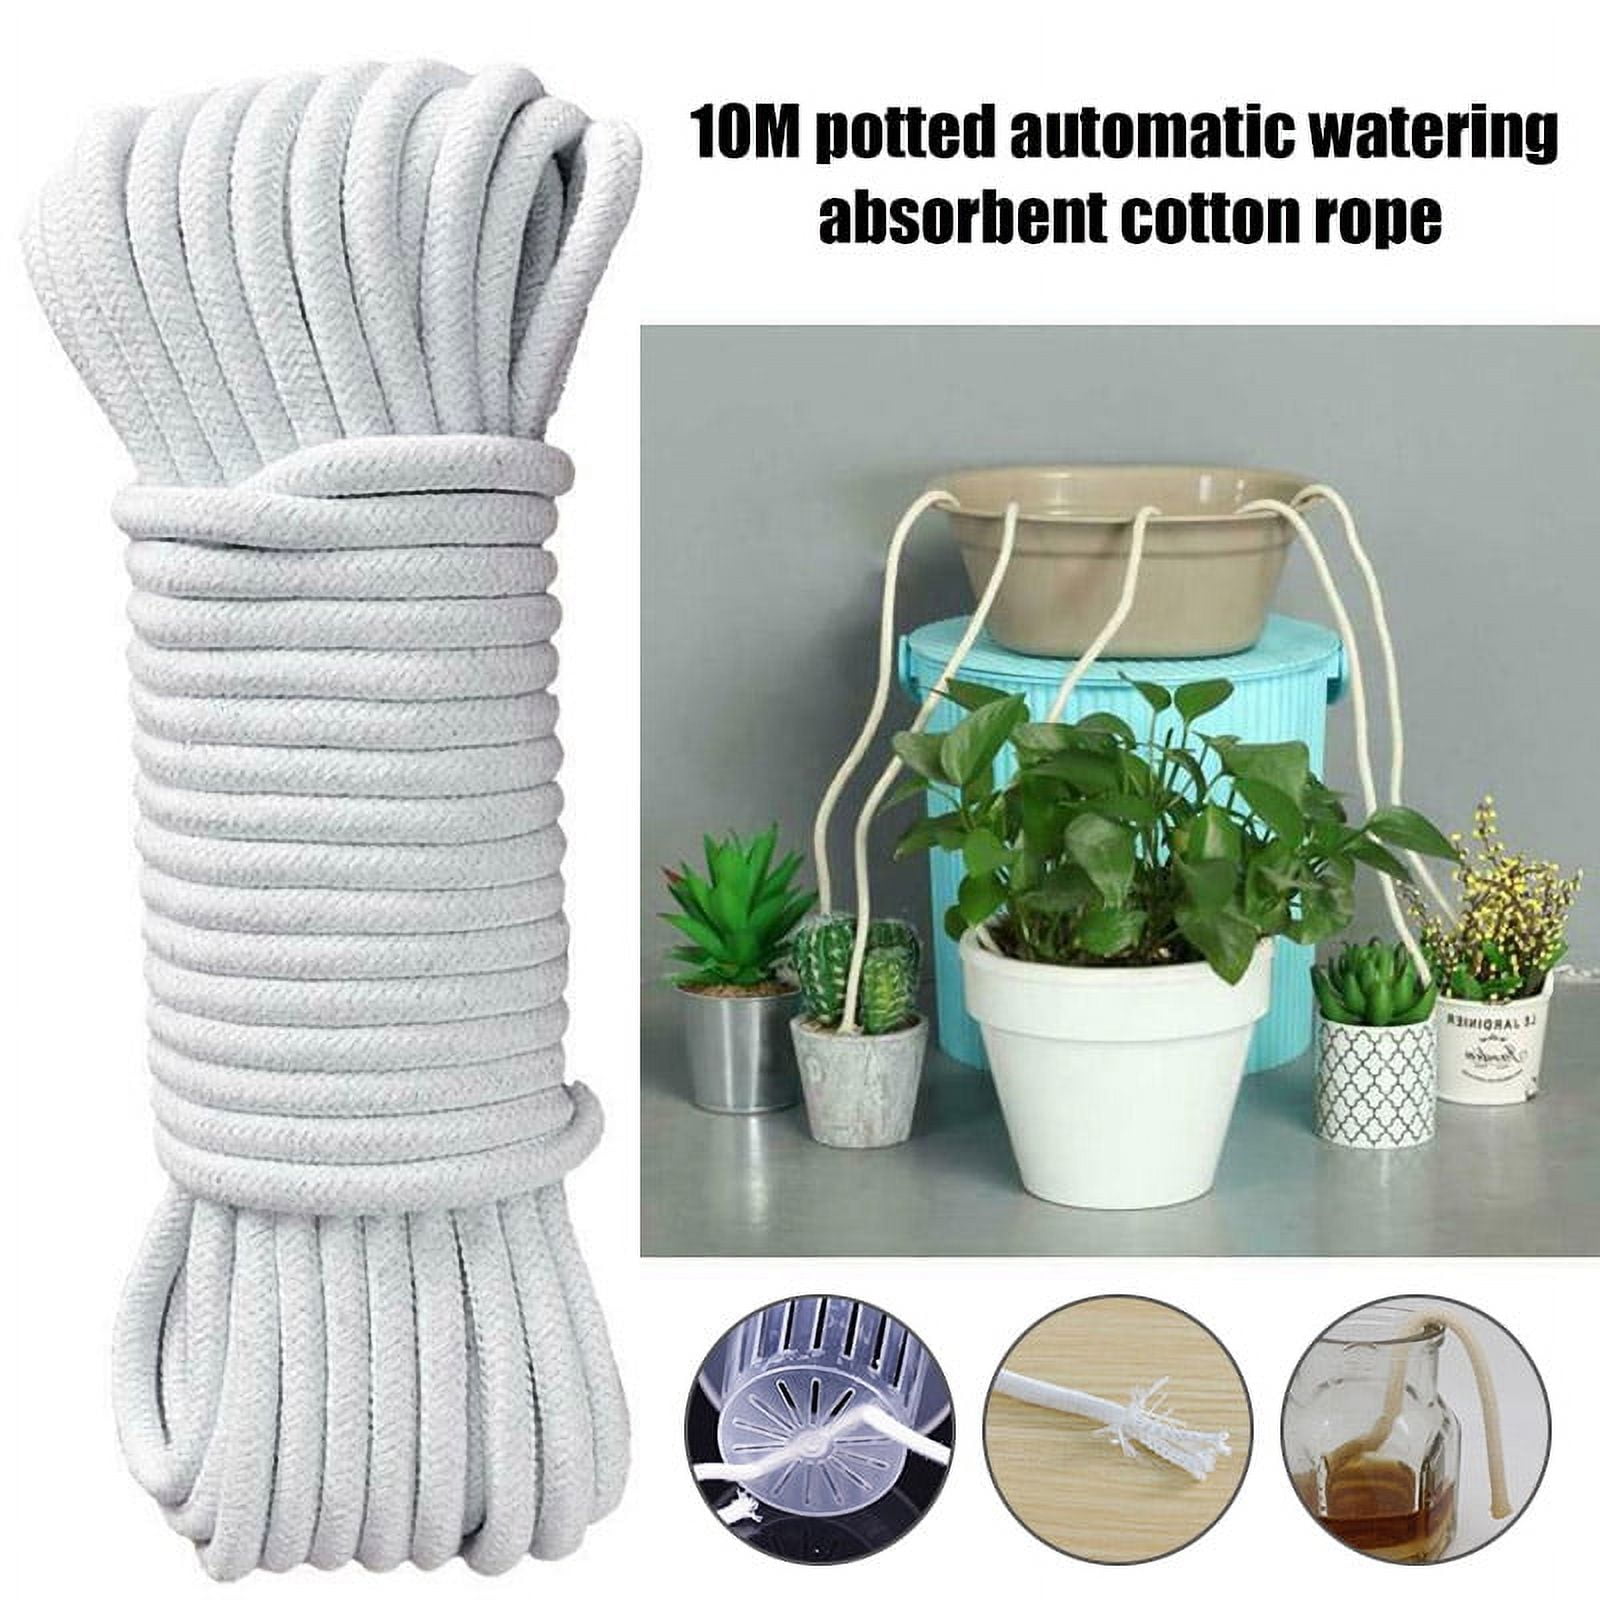 10M Self Watering Wick Cord Cotton Rope for Indoor Potted Plant  Self-Watering DIY